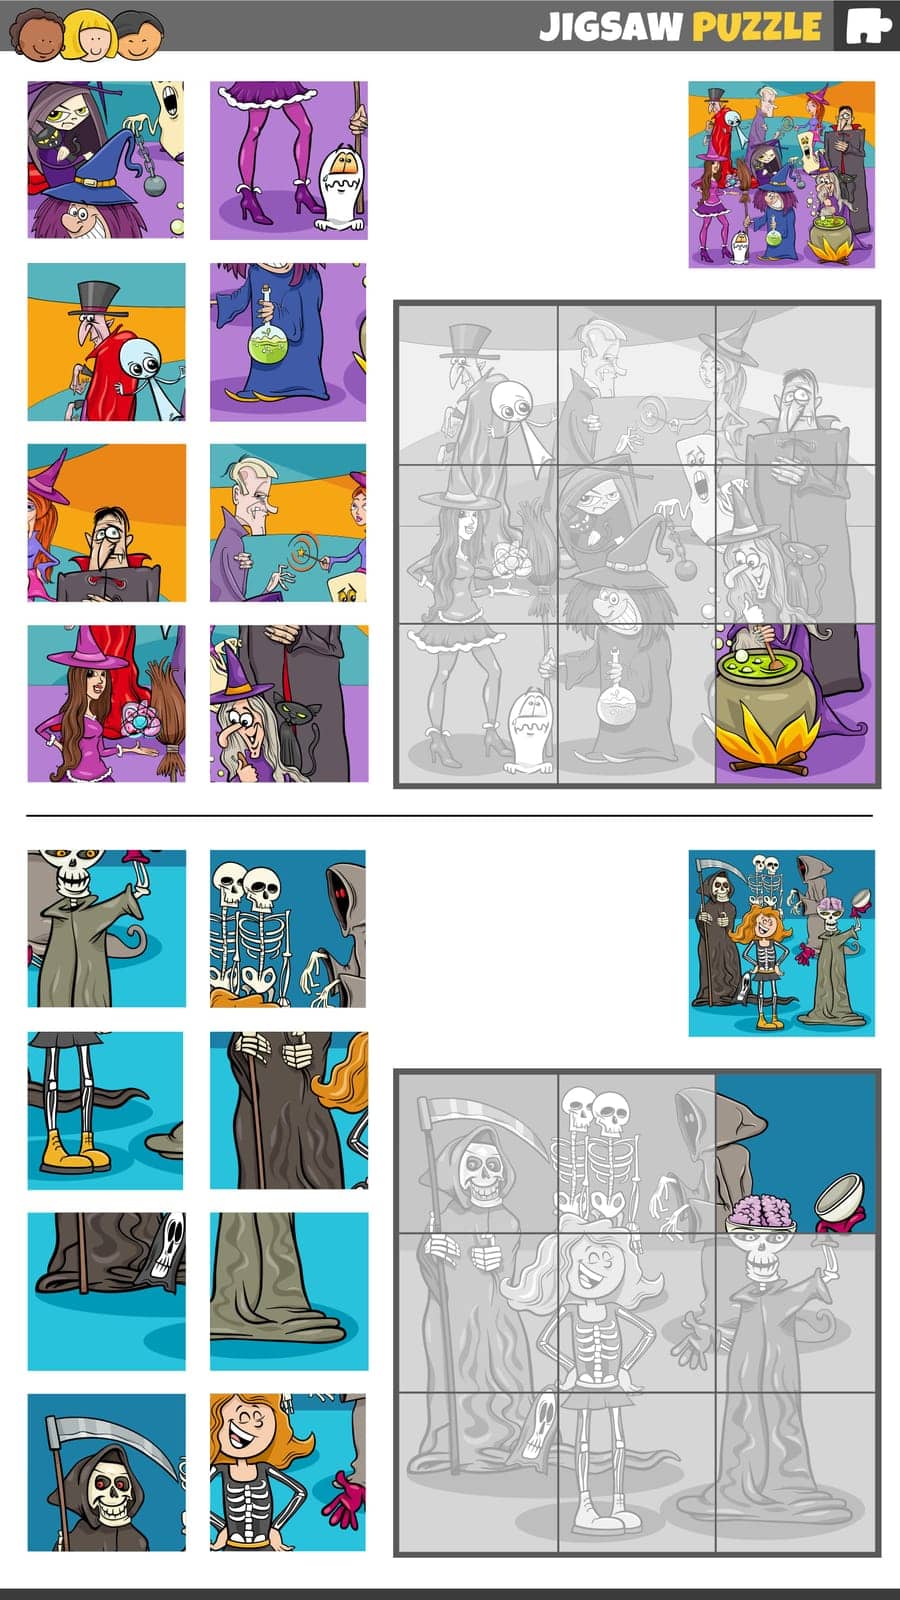 Cartoon illustration of educational jigsaw puzzle activities set with fantasy characters